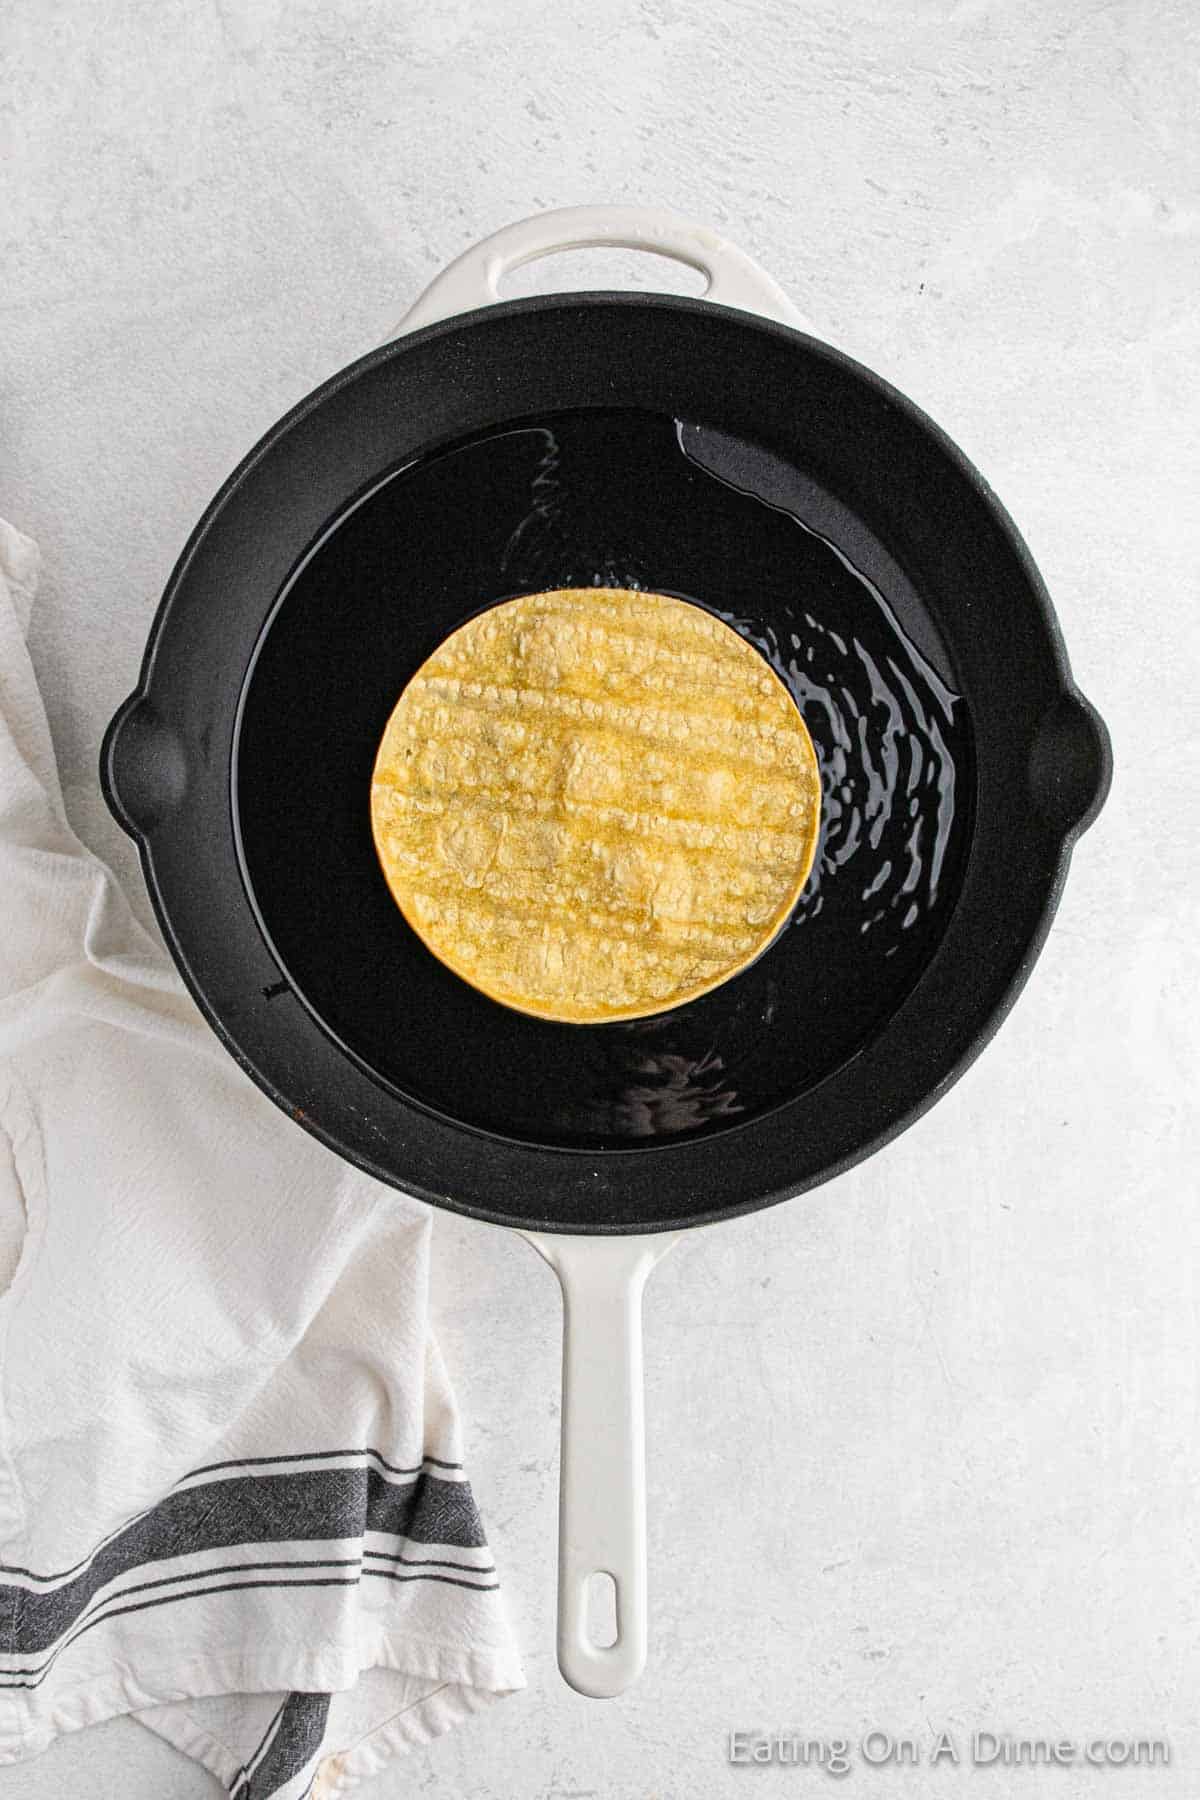 Placing corn tortillas in hot oil in a cast iron skillet